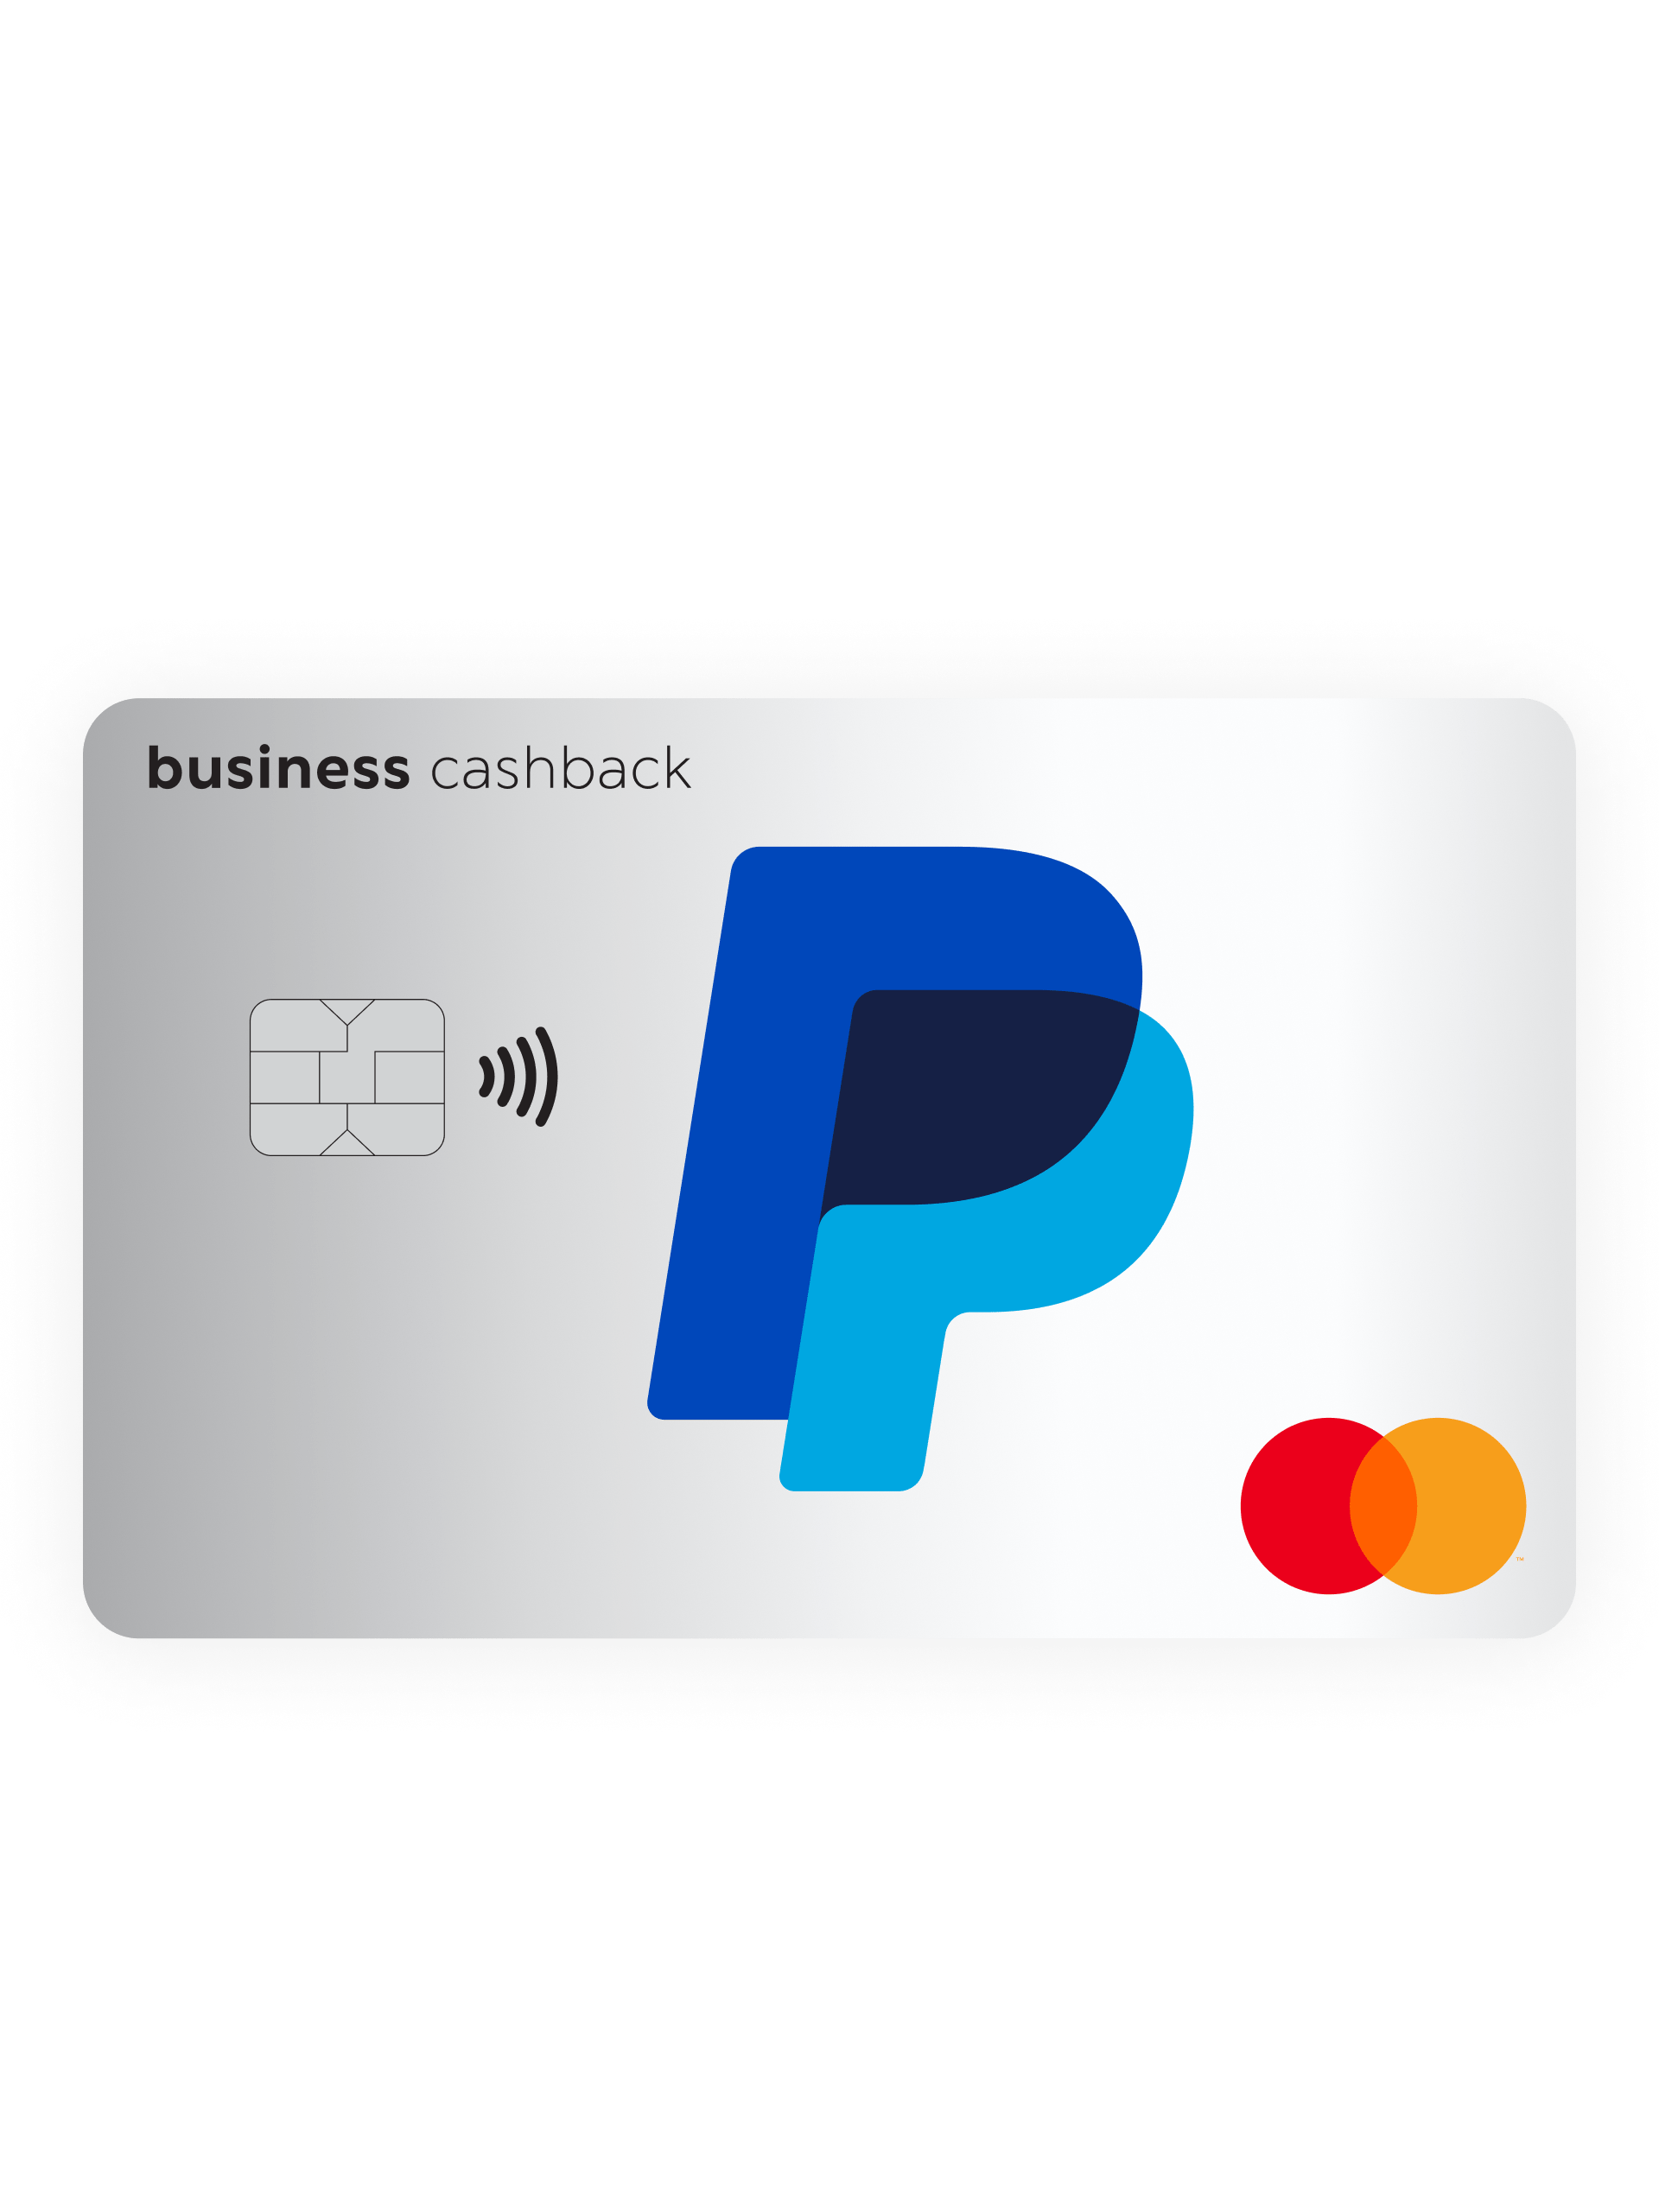 What debit or credit cards can I use with PayPal? | PayPal ZM